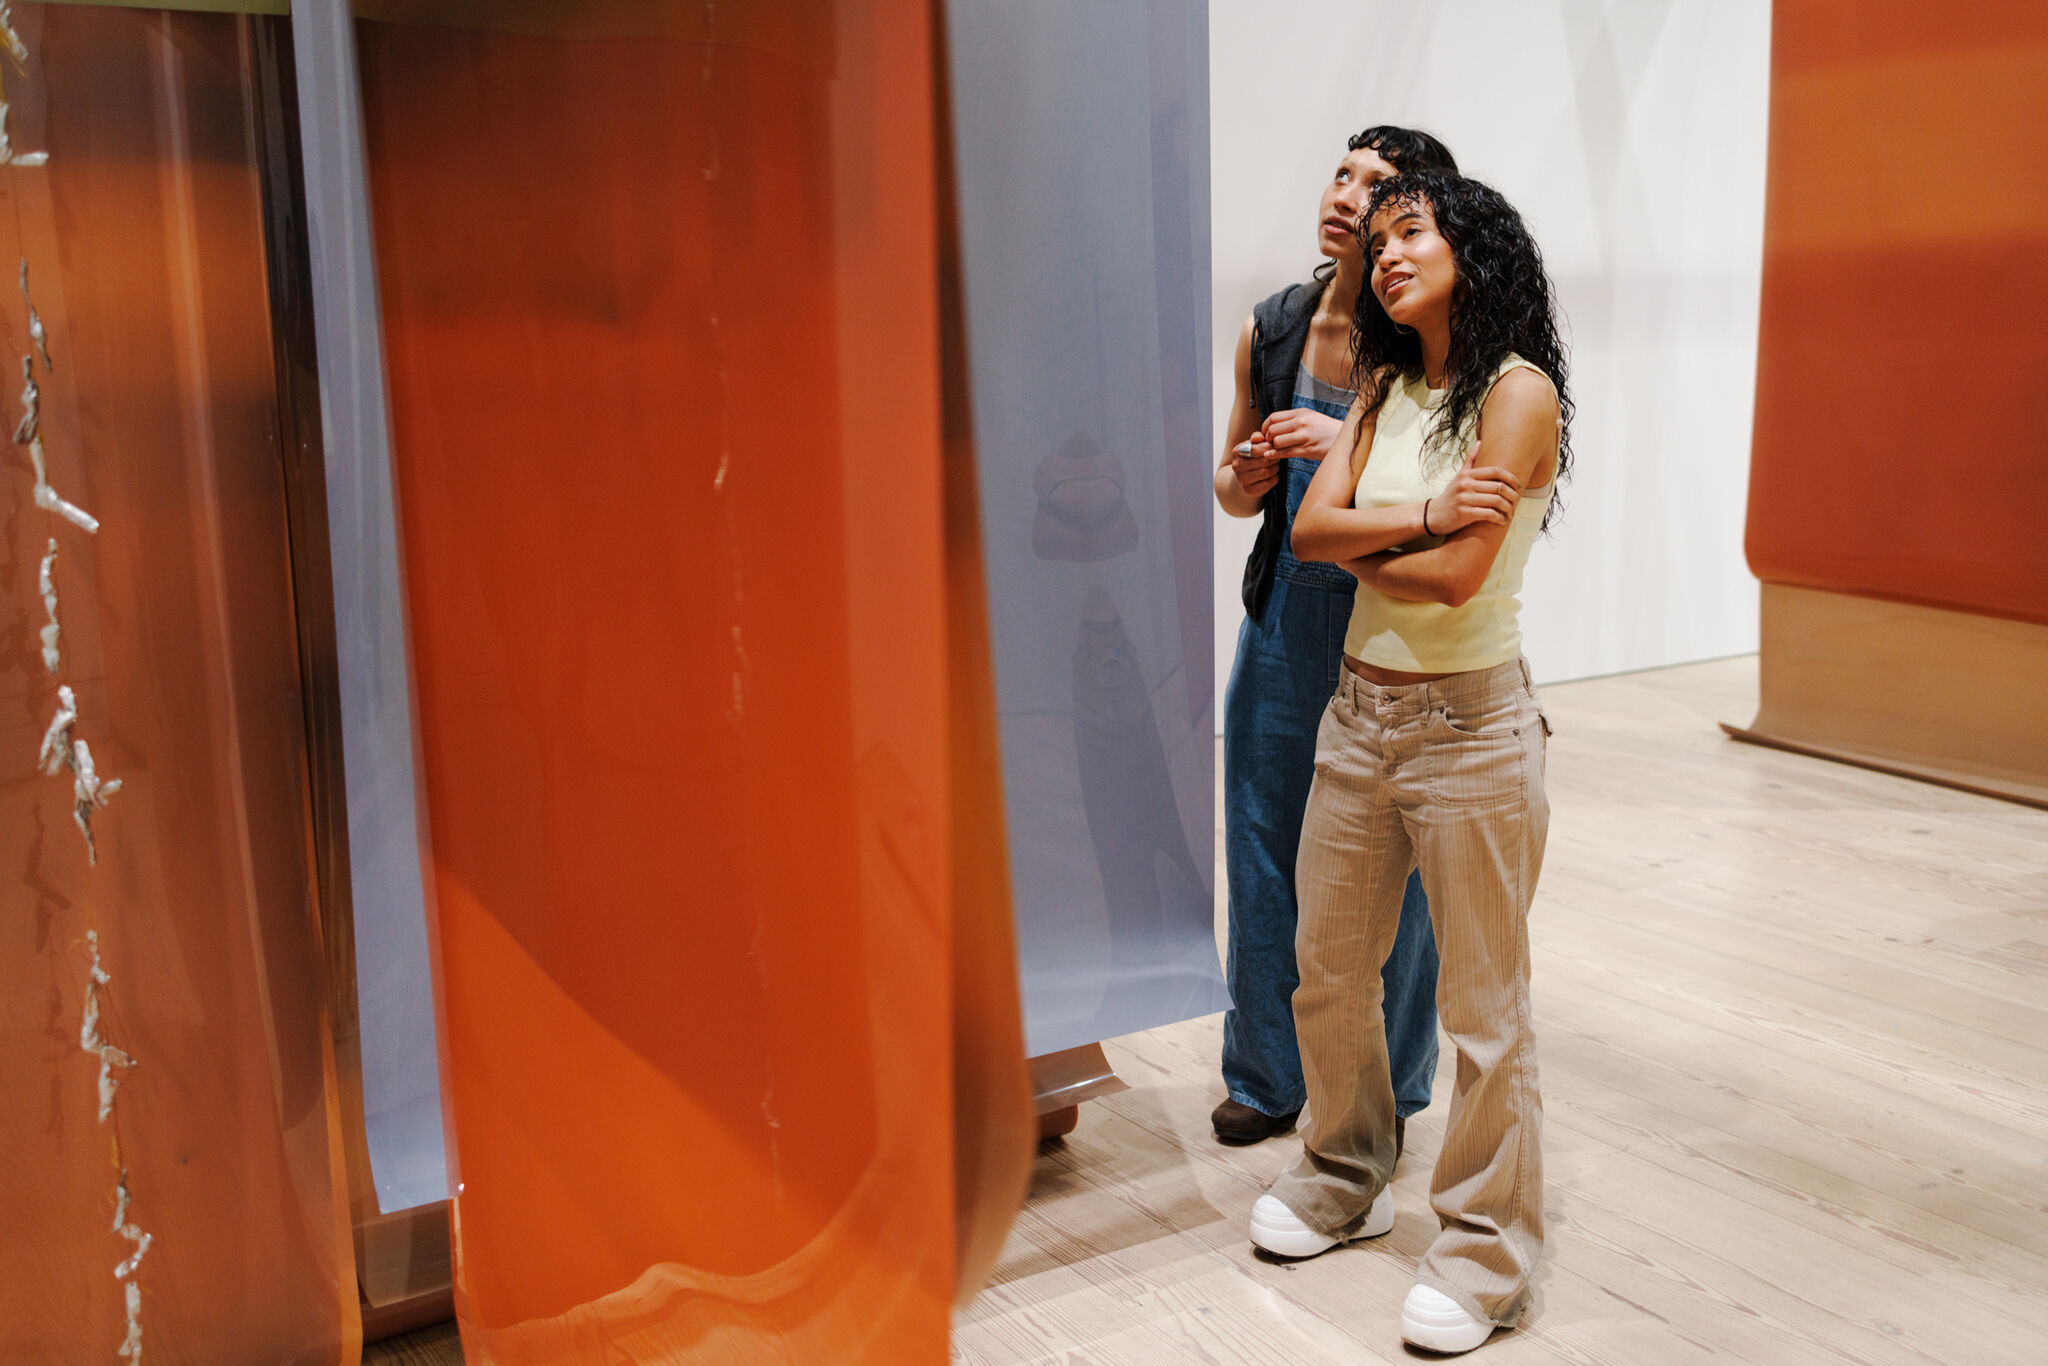 Two people stand in an art gallery, observing large hanging orange and blue panels.